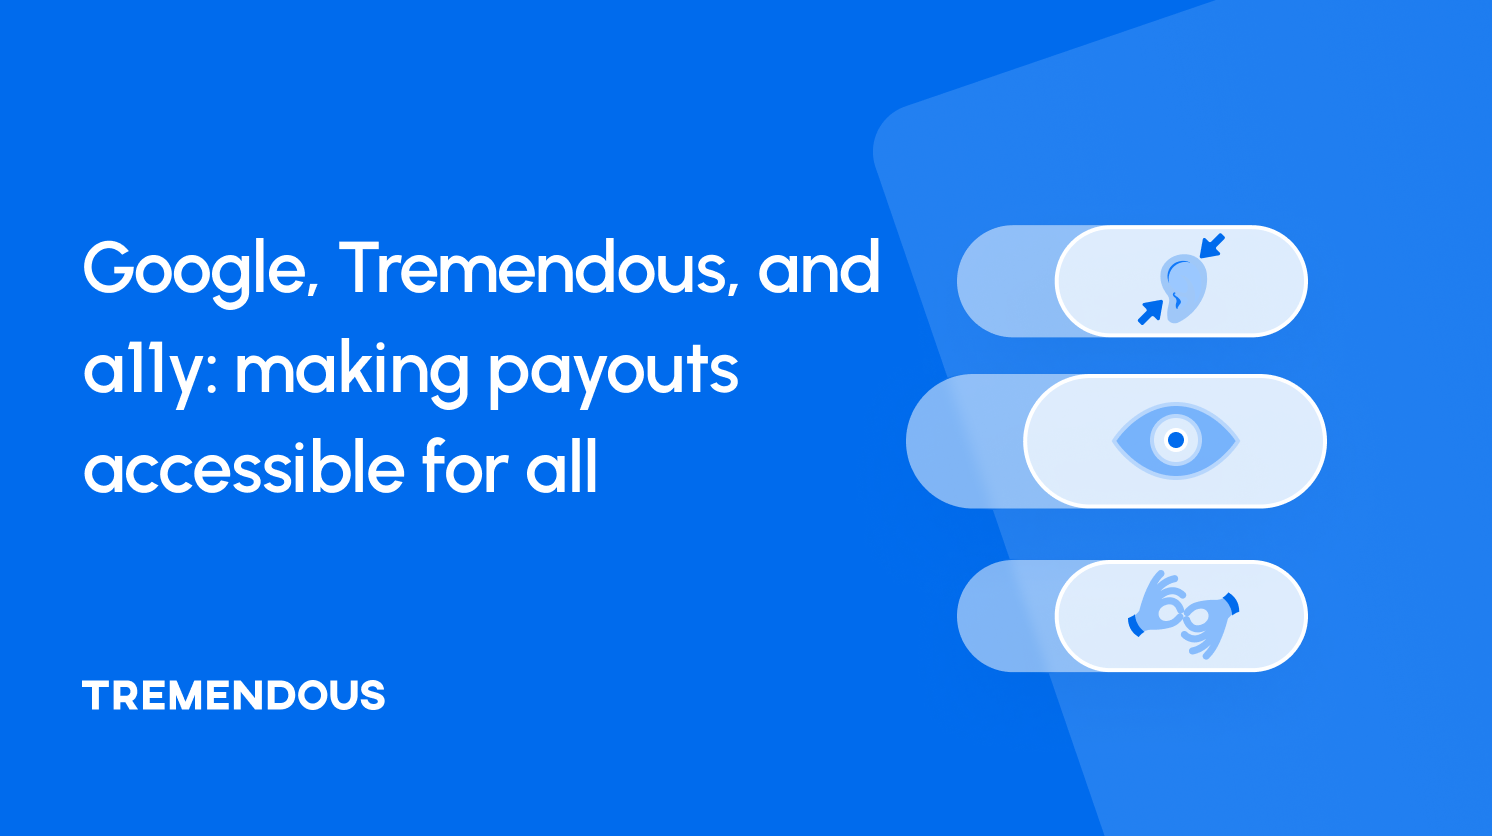 Google, Tremendous and a11y: making payouts accessible for all